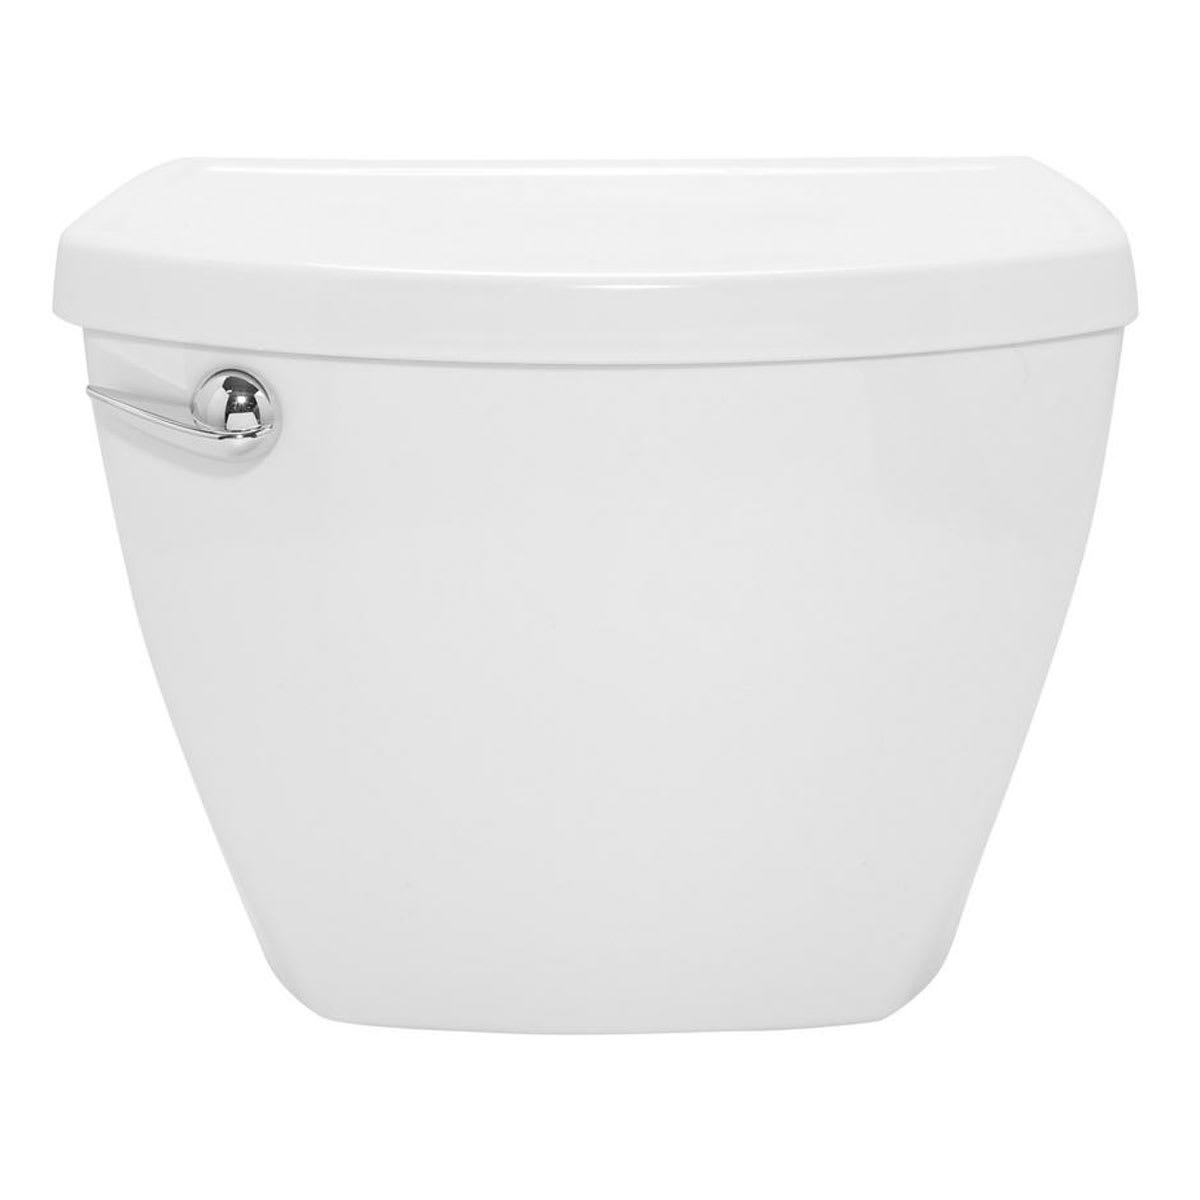 American Standard Cadet 3 12" Toilet Tank with Lid Cover White 4021.128N.020 